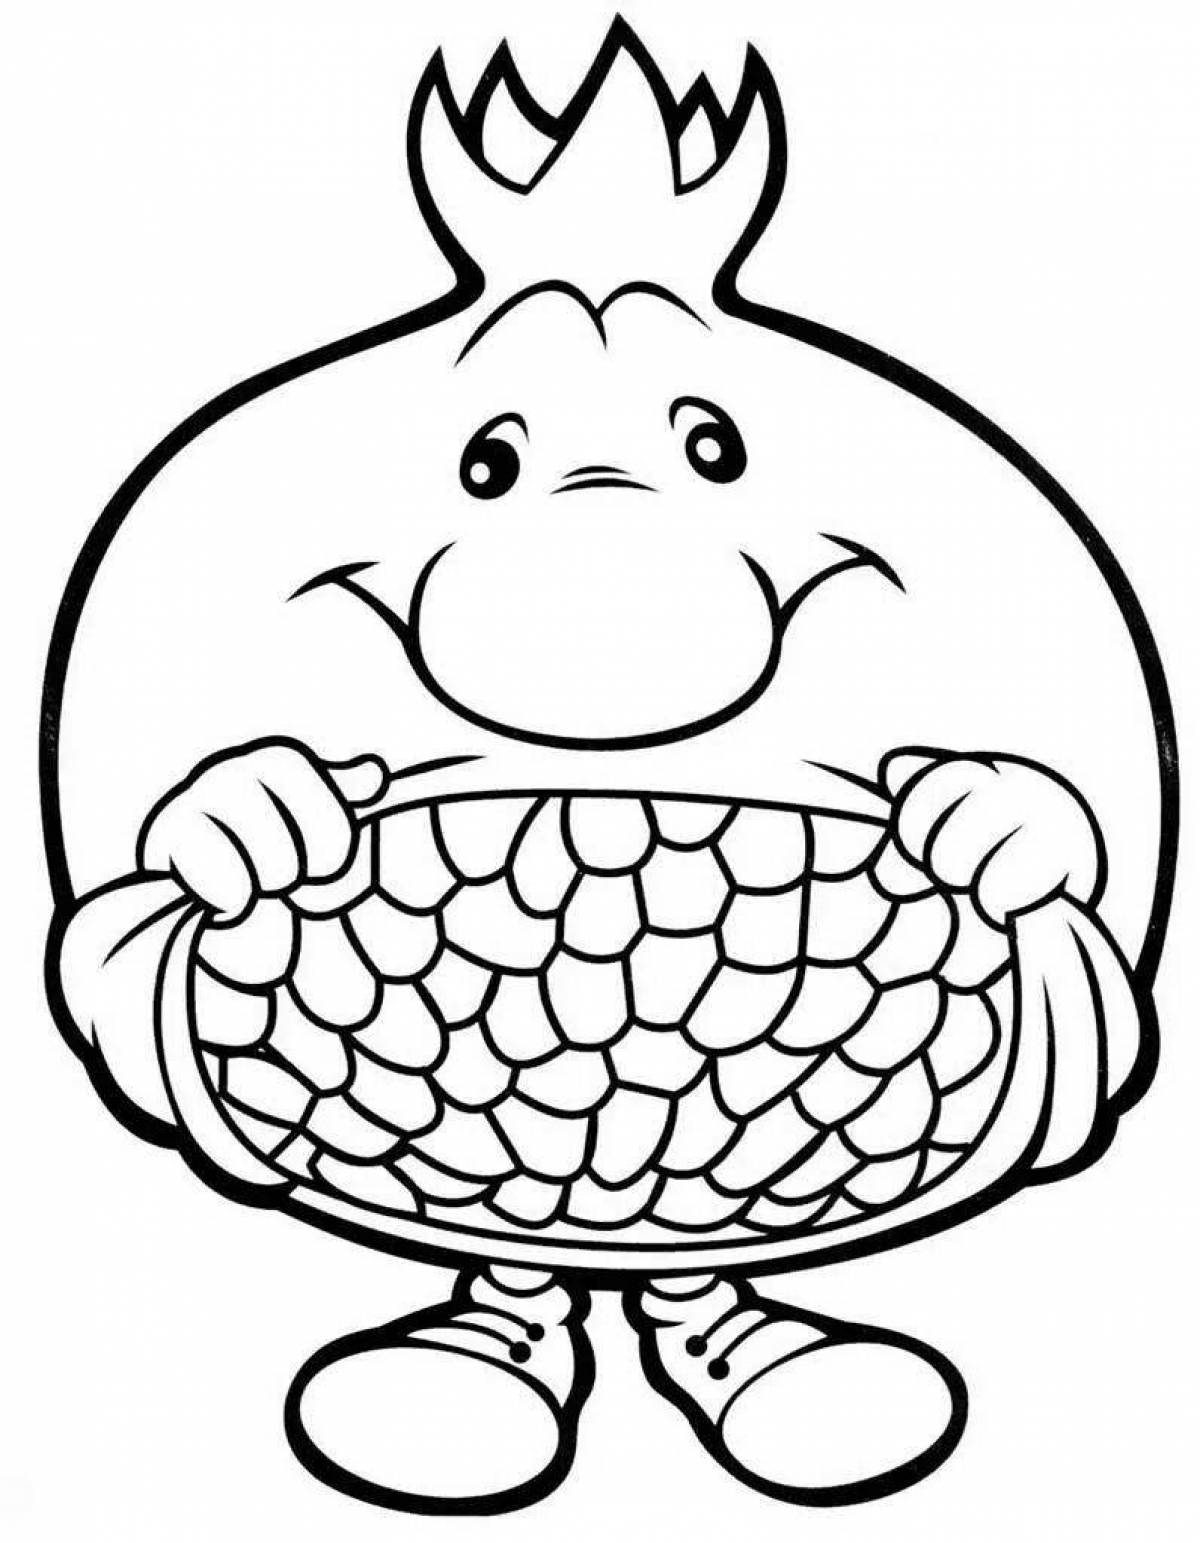 Colorful pomegranate coloring page for kids